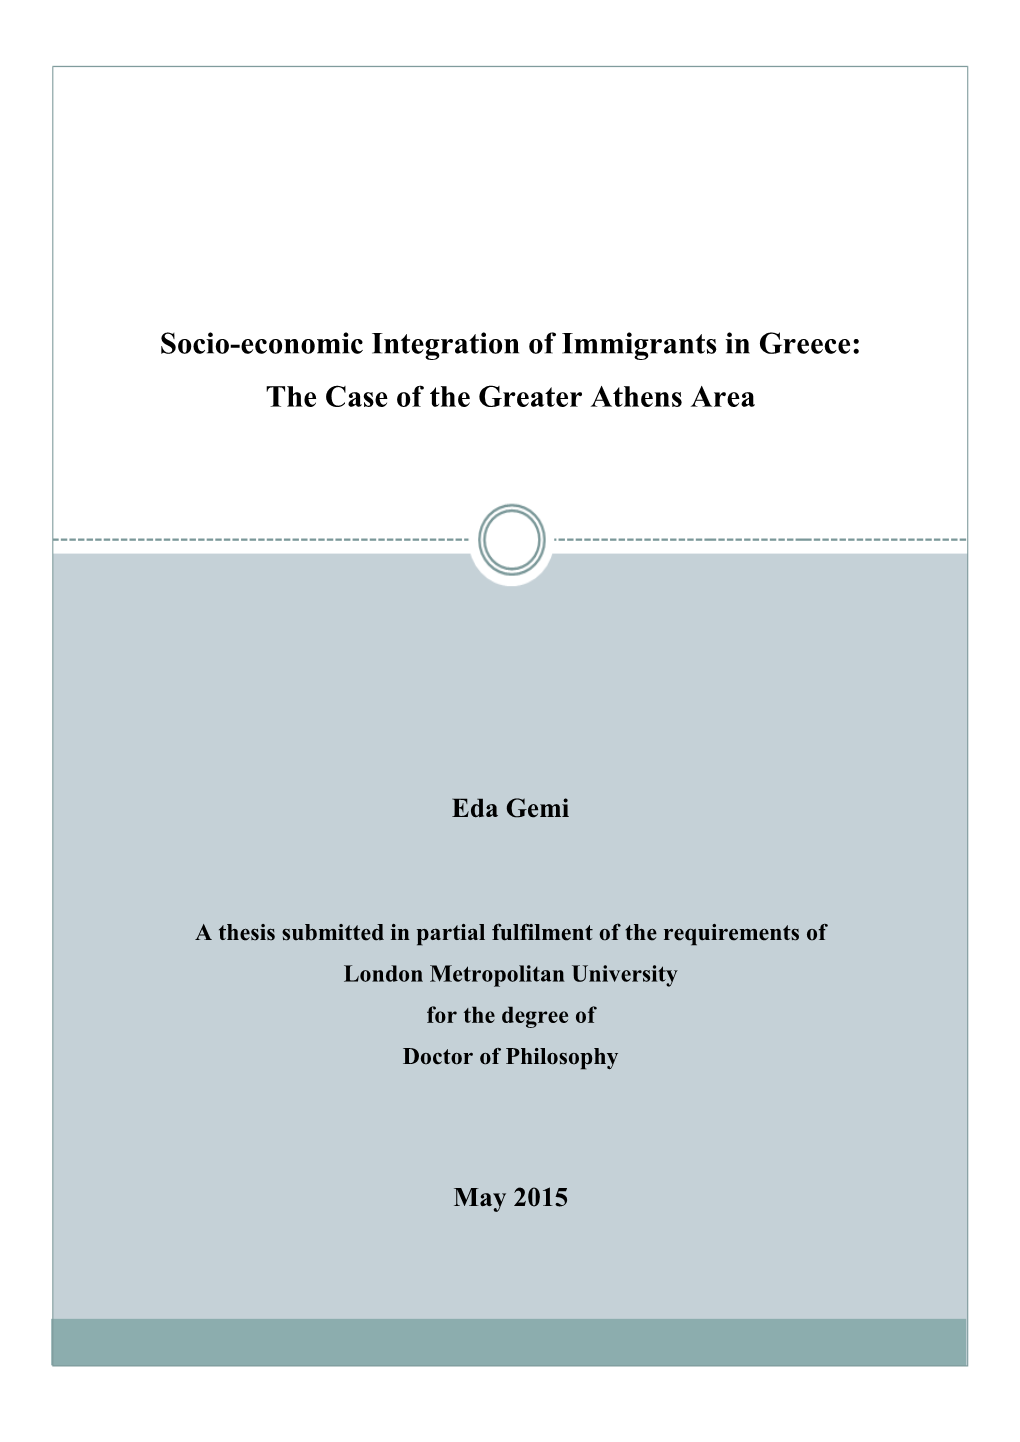 Socio-Economic Integration of Immigrants in Greece: the Case of the Greater Athens Area